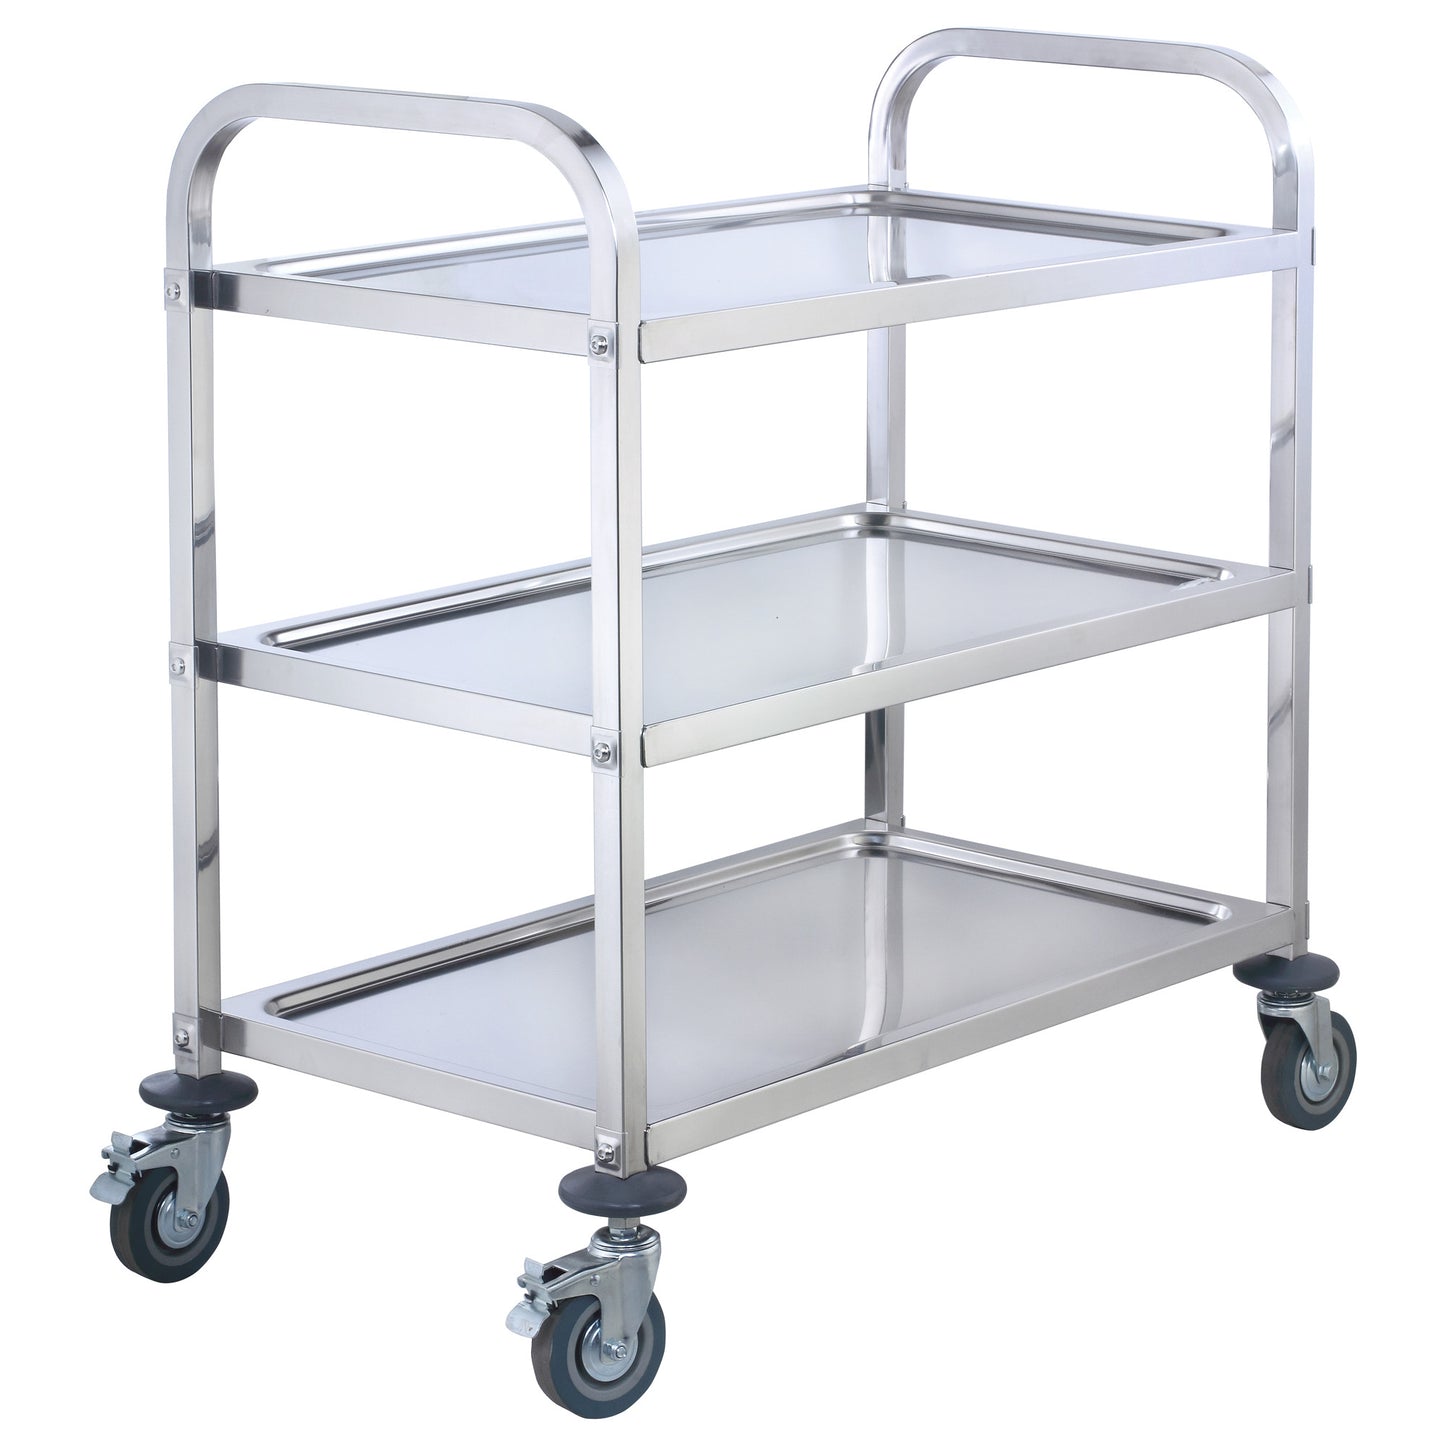 SUC-40 - Stainless Steel Trolley, 3 Tiers - 33" x 17" x 35"